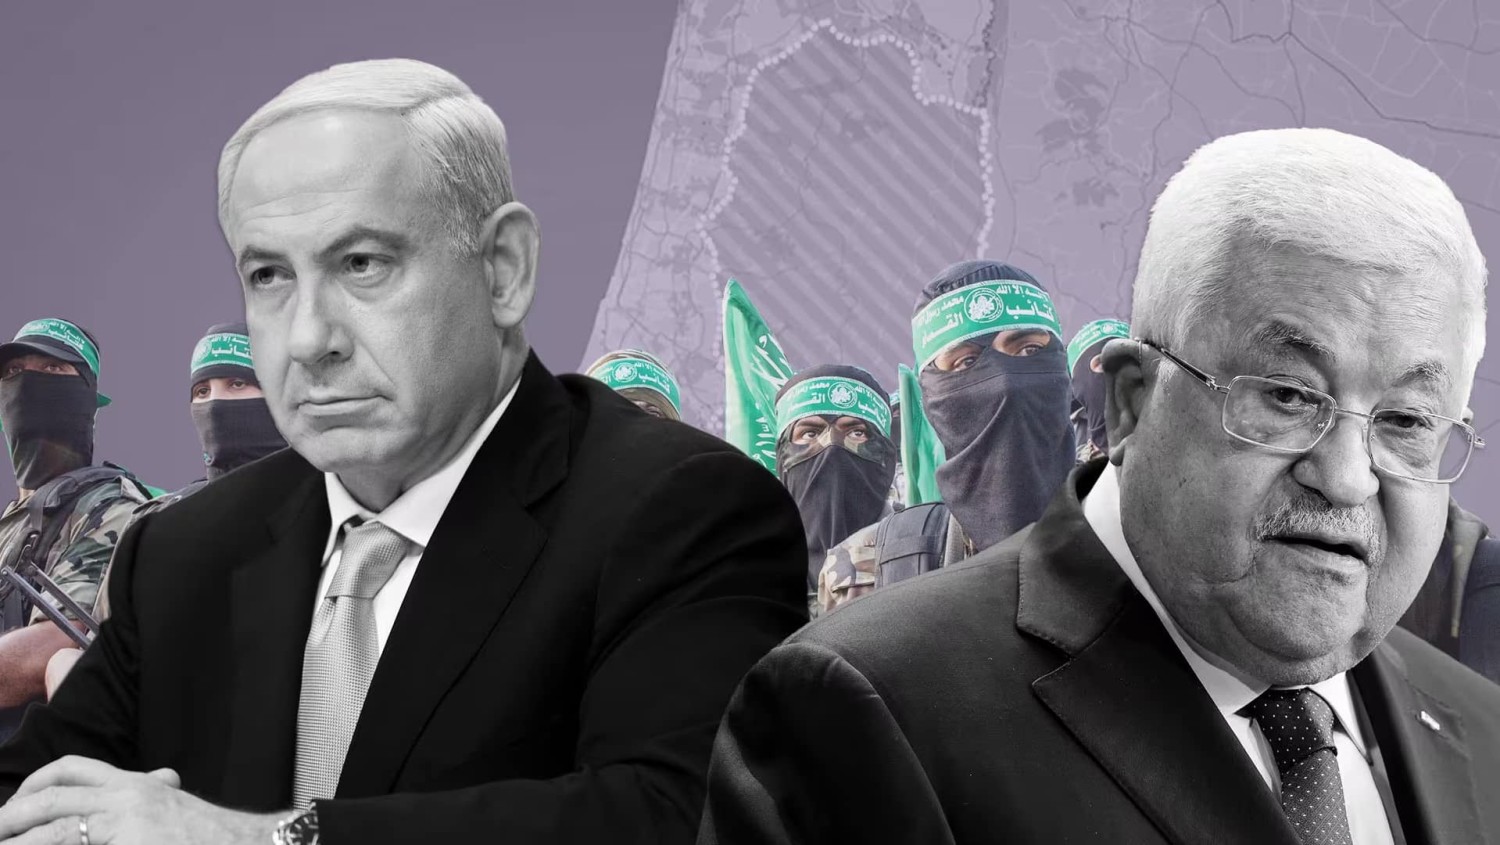 For decades, world leaders have sold an Israeli-Palestinian two-state solution as the best hope for peace in the region, but is it even possible? CBC’s Ellen Mauro breaks down the major challenges standing in the way.